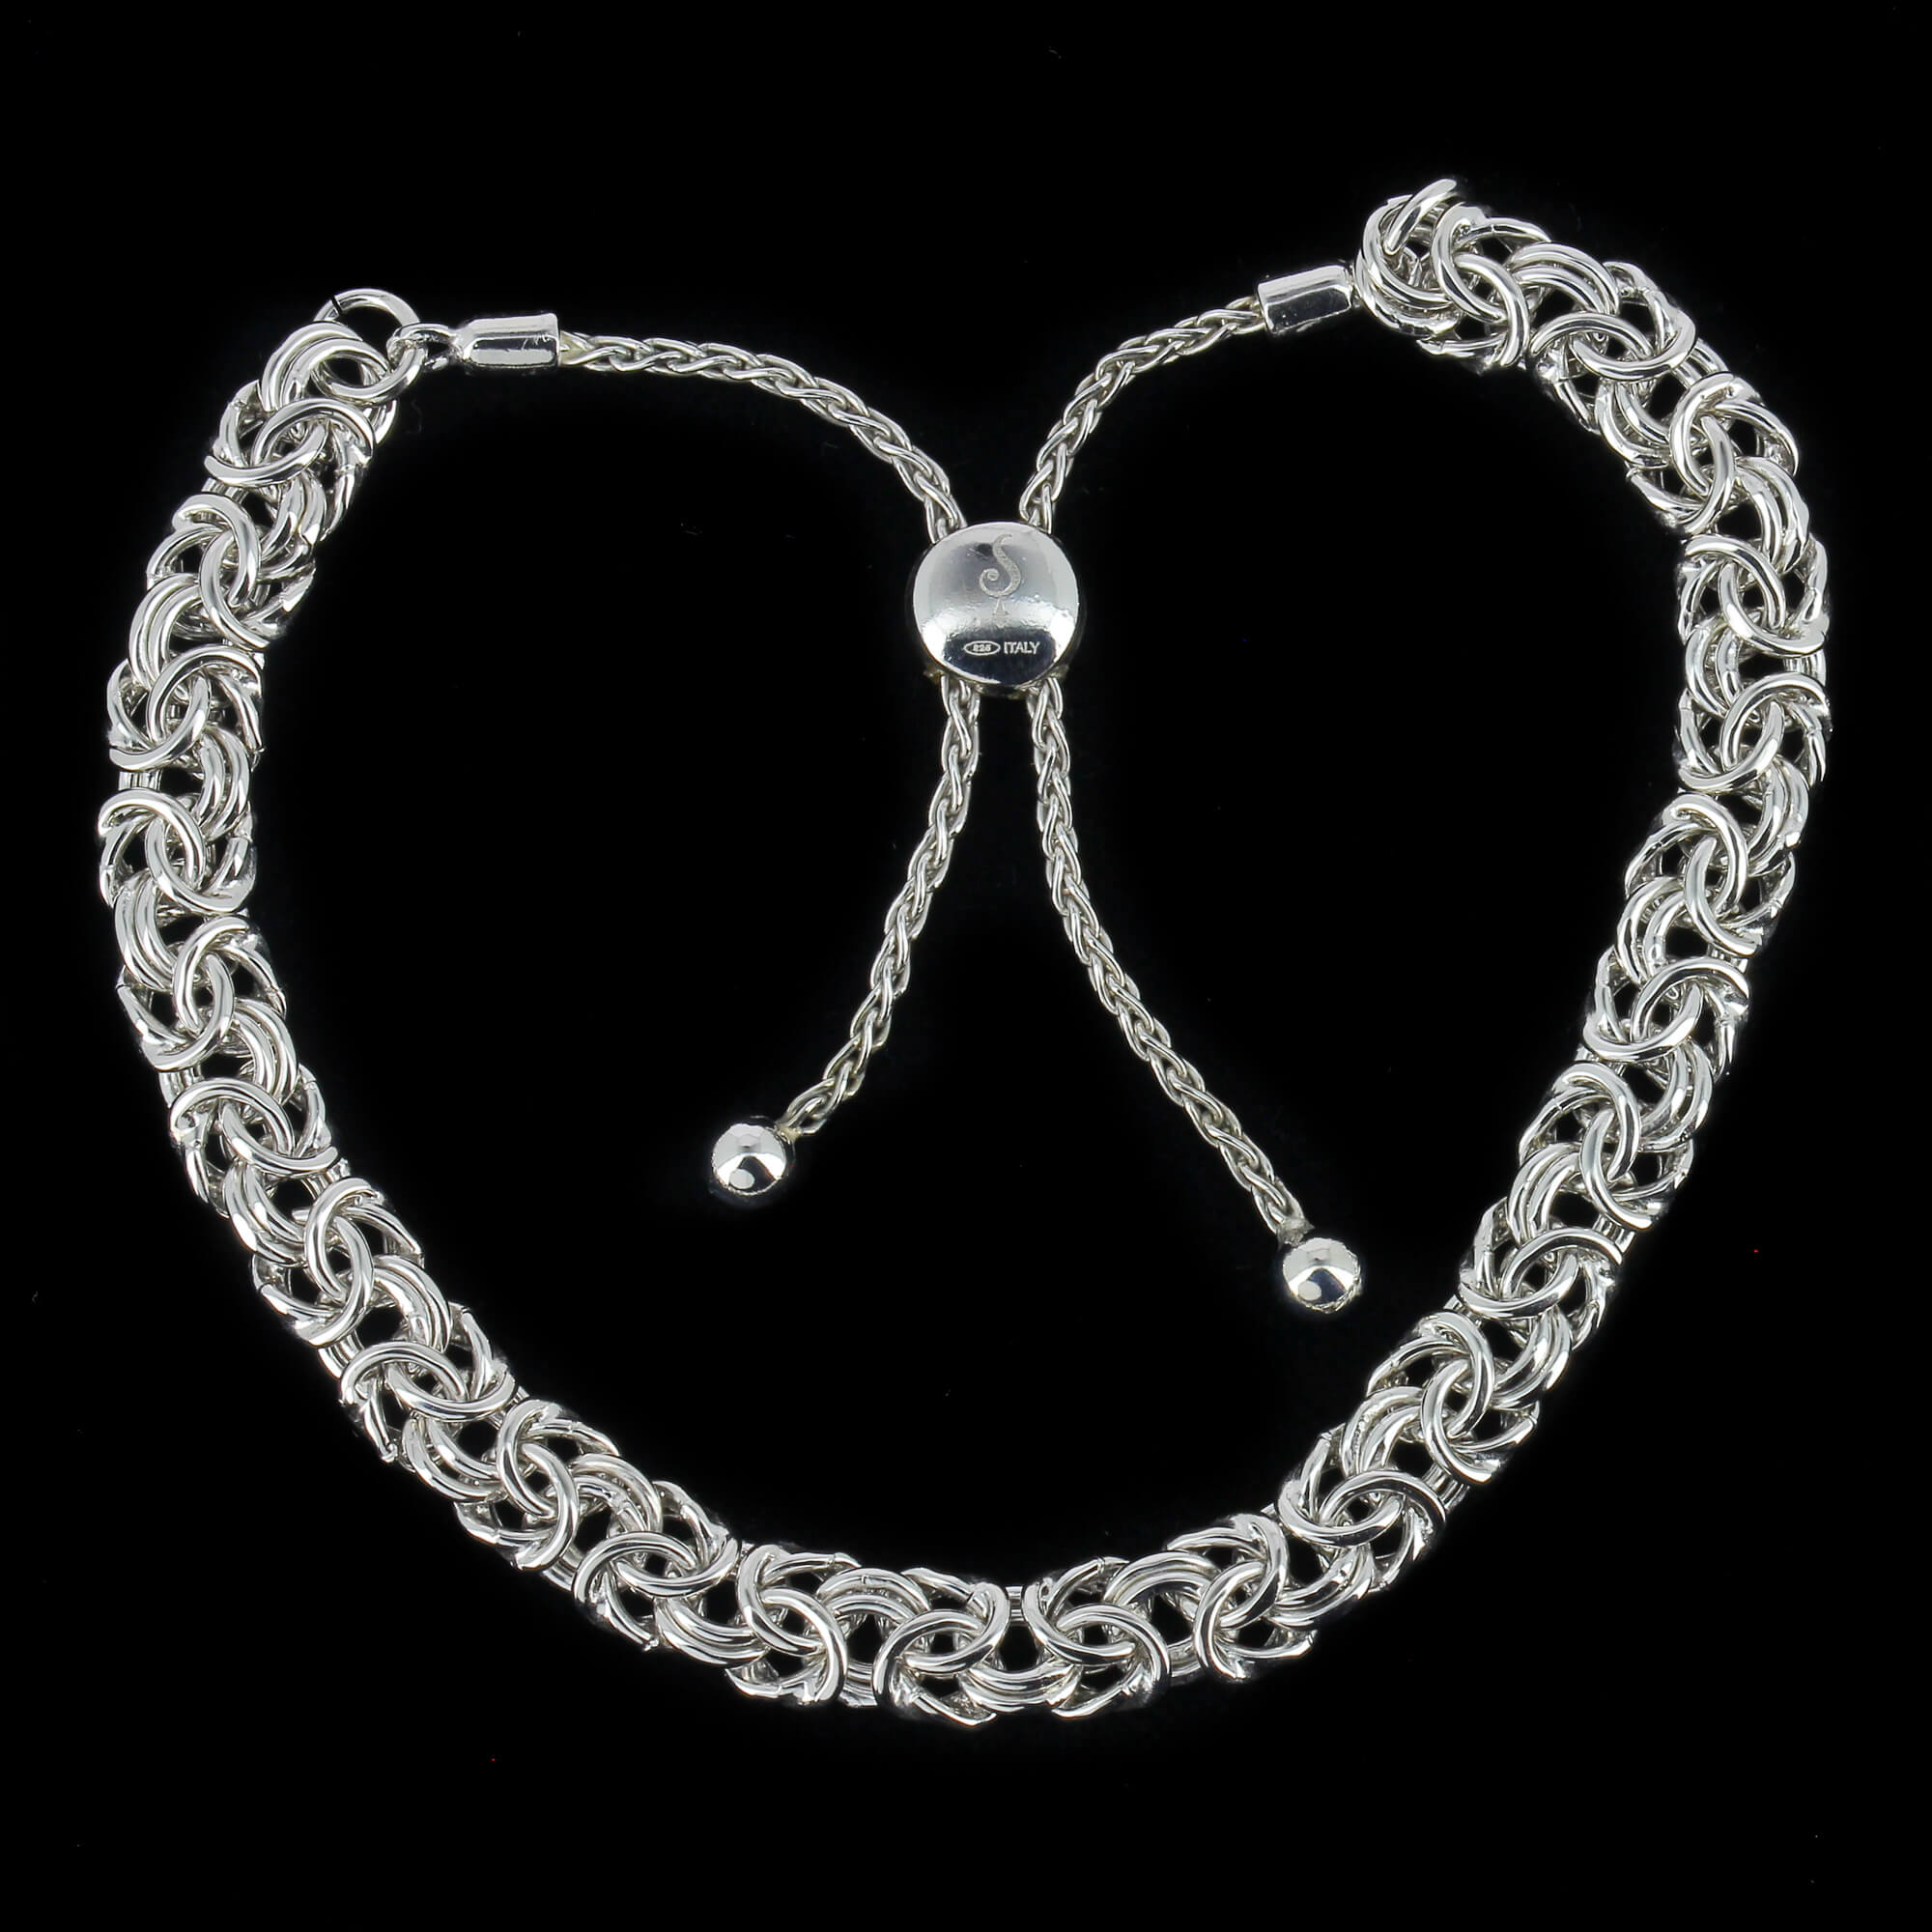 Created silver bracelet with adjustable lock